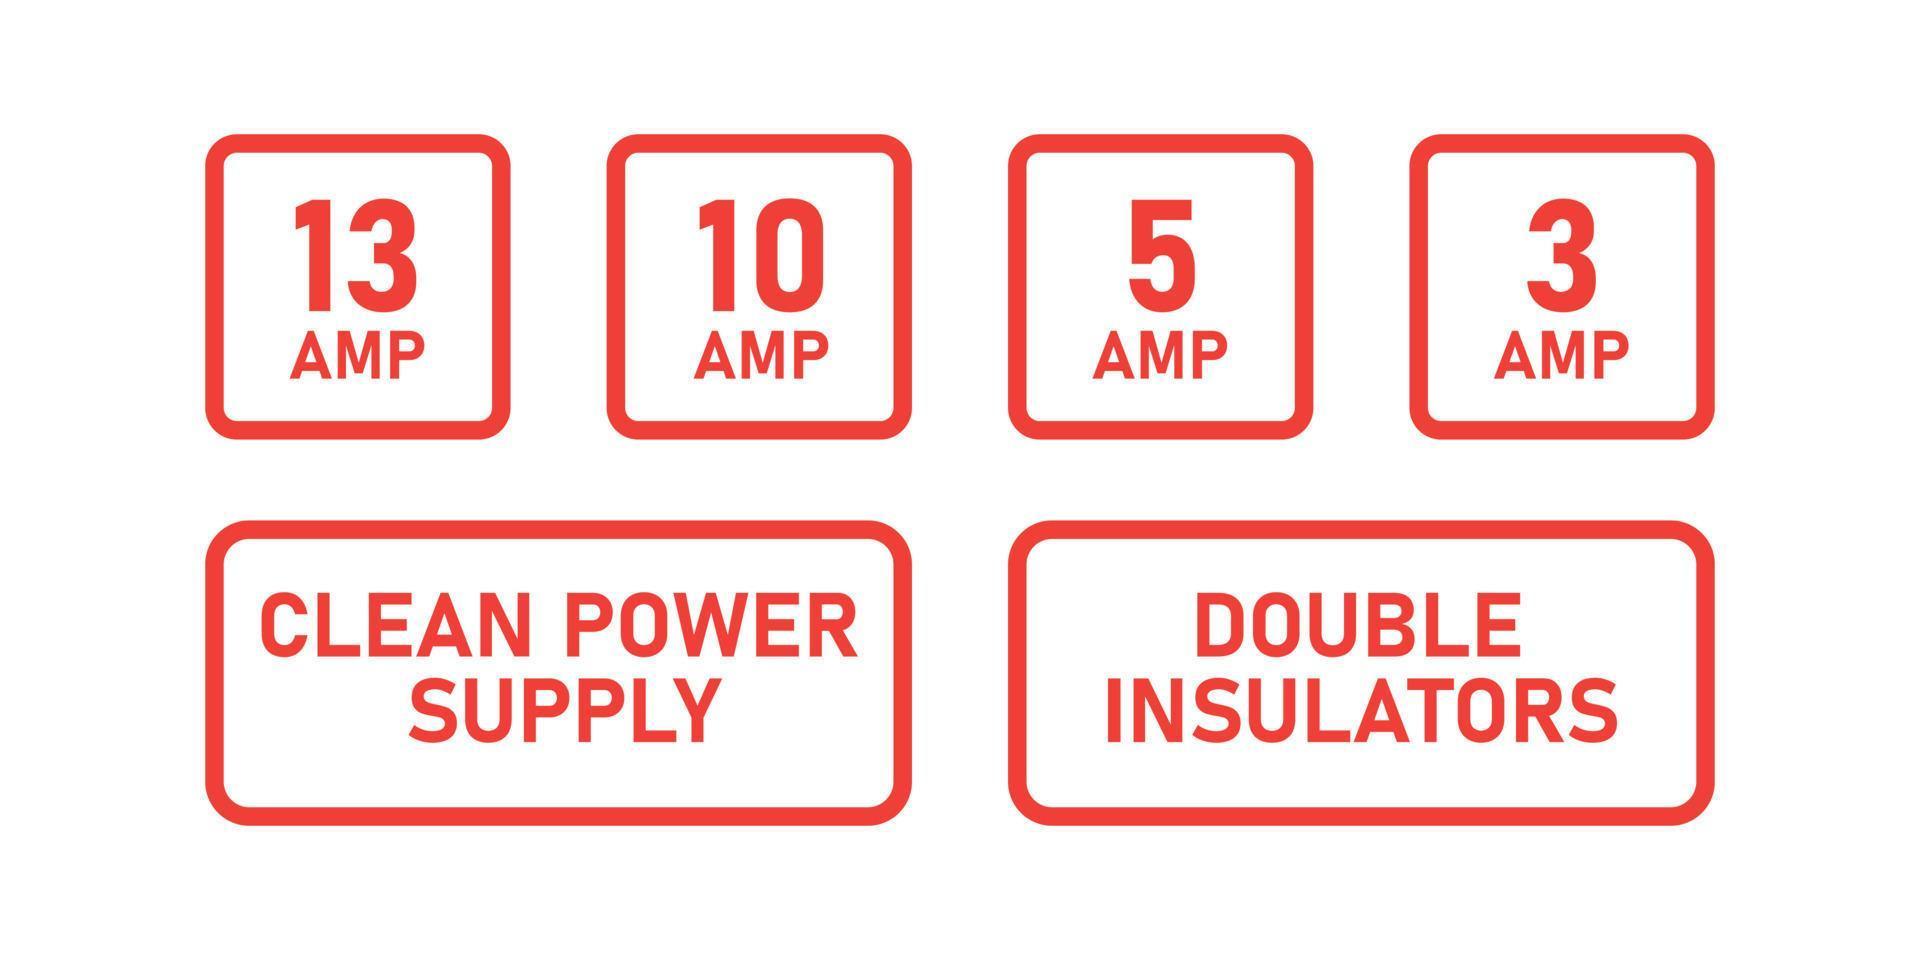 Electrical labels line set. Clean power supply, double insulators, 10 AMP. Vector